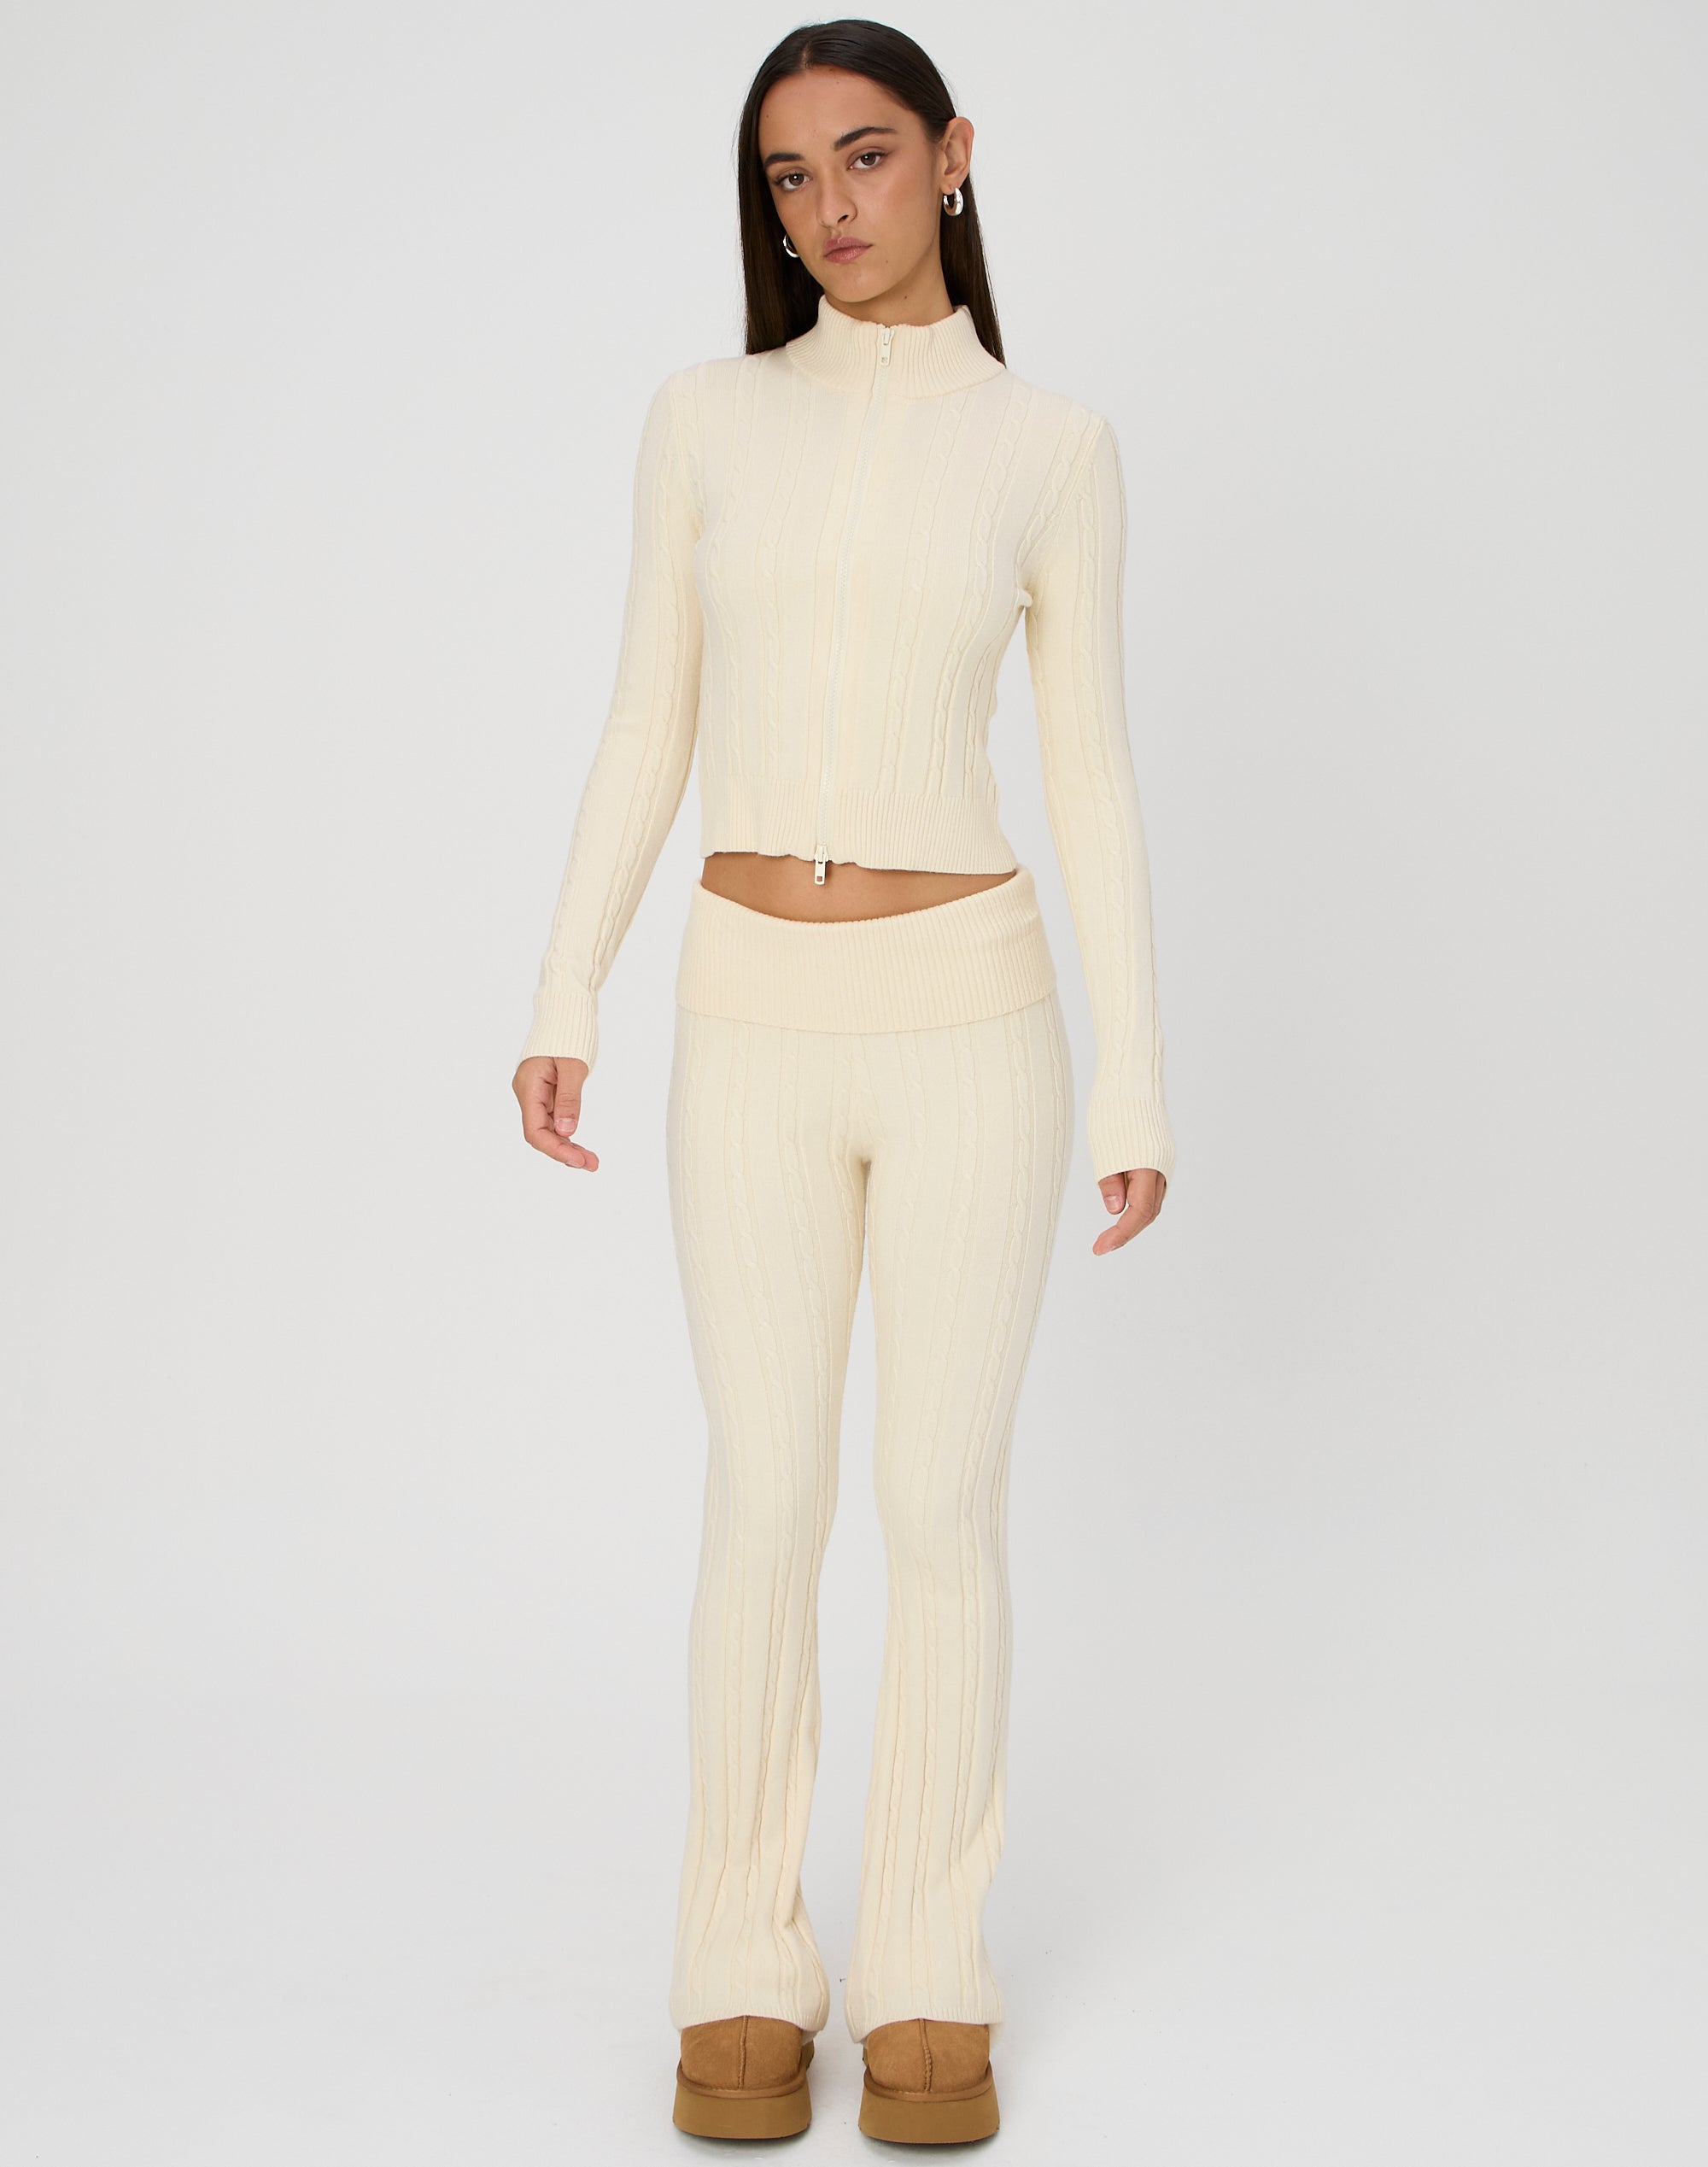 Cotton Foldover Flare Pant in Snow Marle